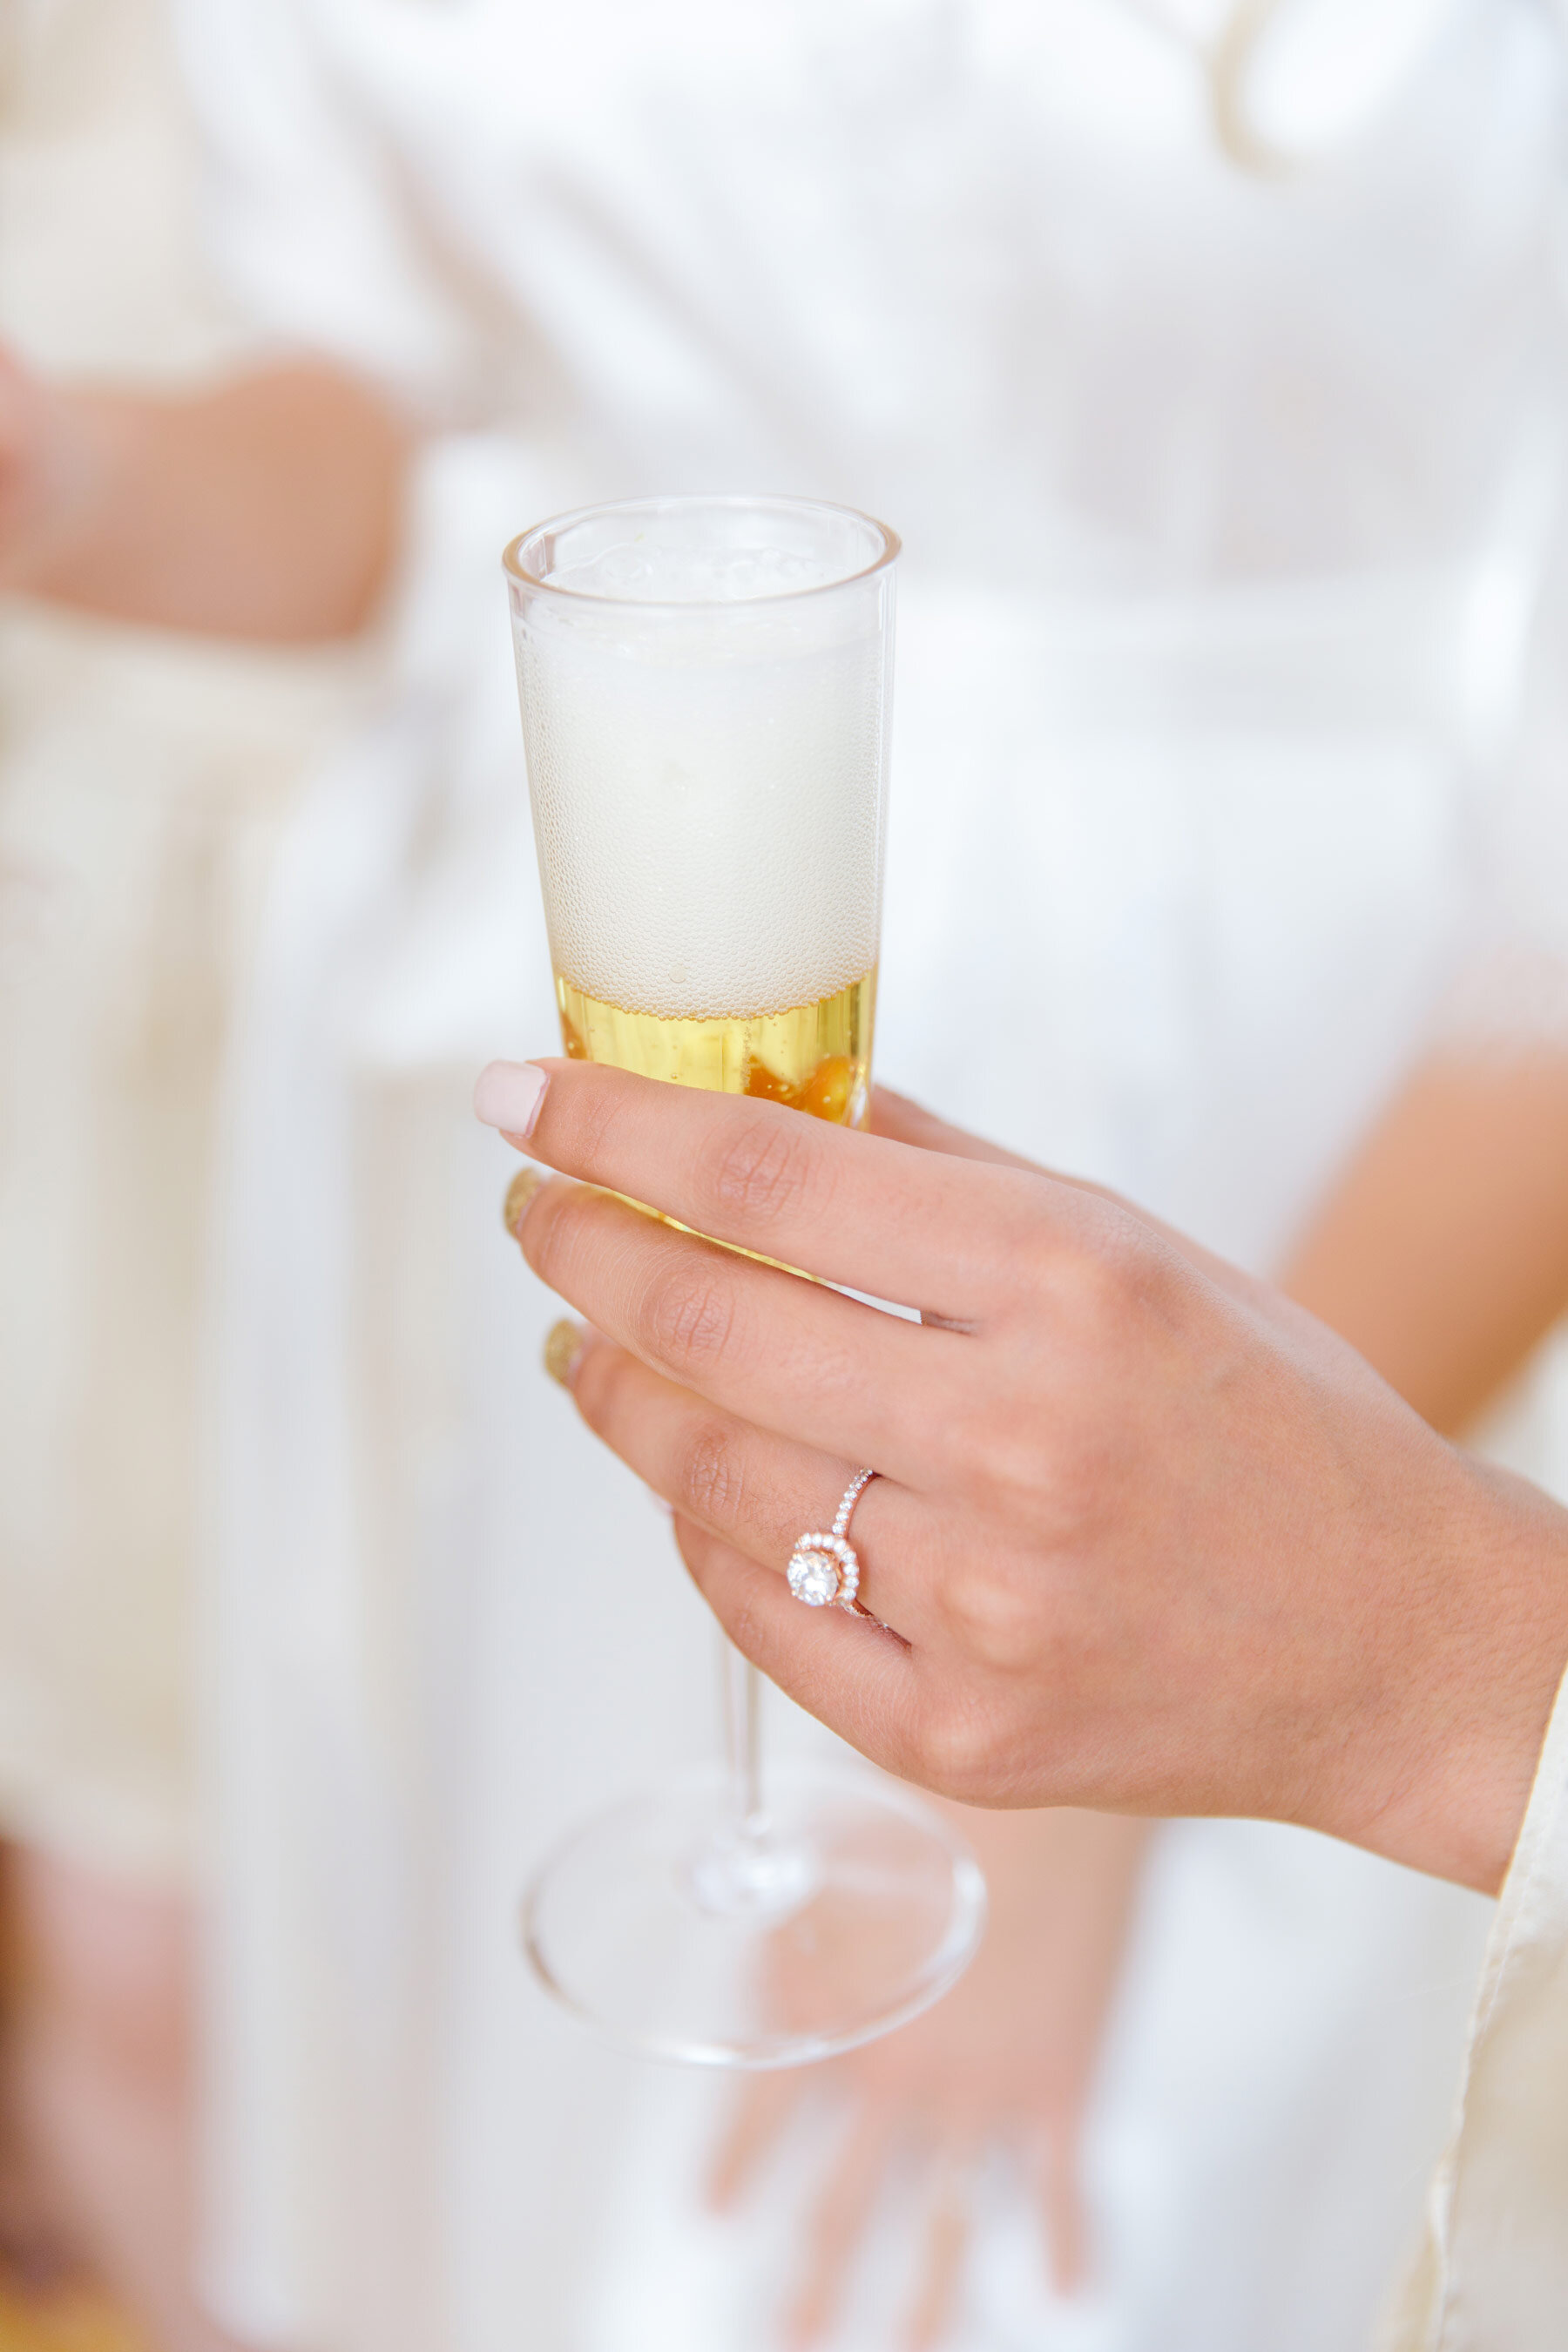  Utah County wedding photographer, Clarity Lane captures this bride holding a champagne glass on her wedding morning. wedding morning glass women's wedding nails silk brides robe Utah county wedding photographer women's white gold halo wedding ring #